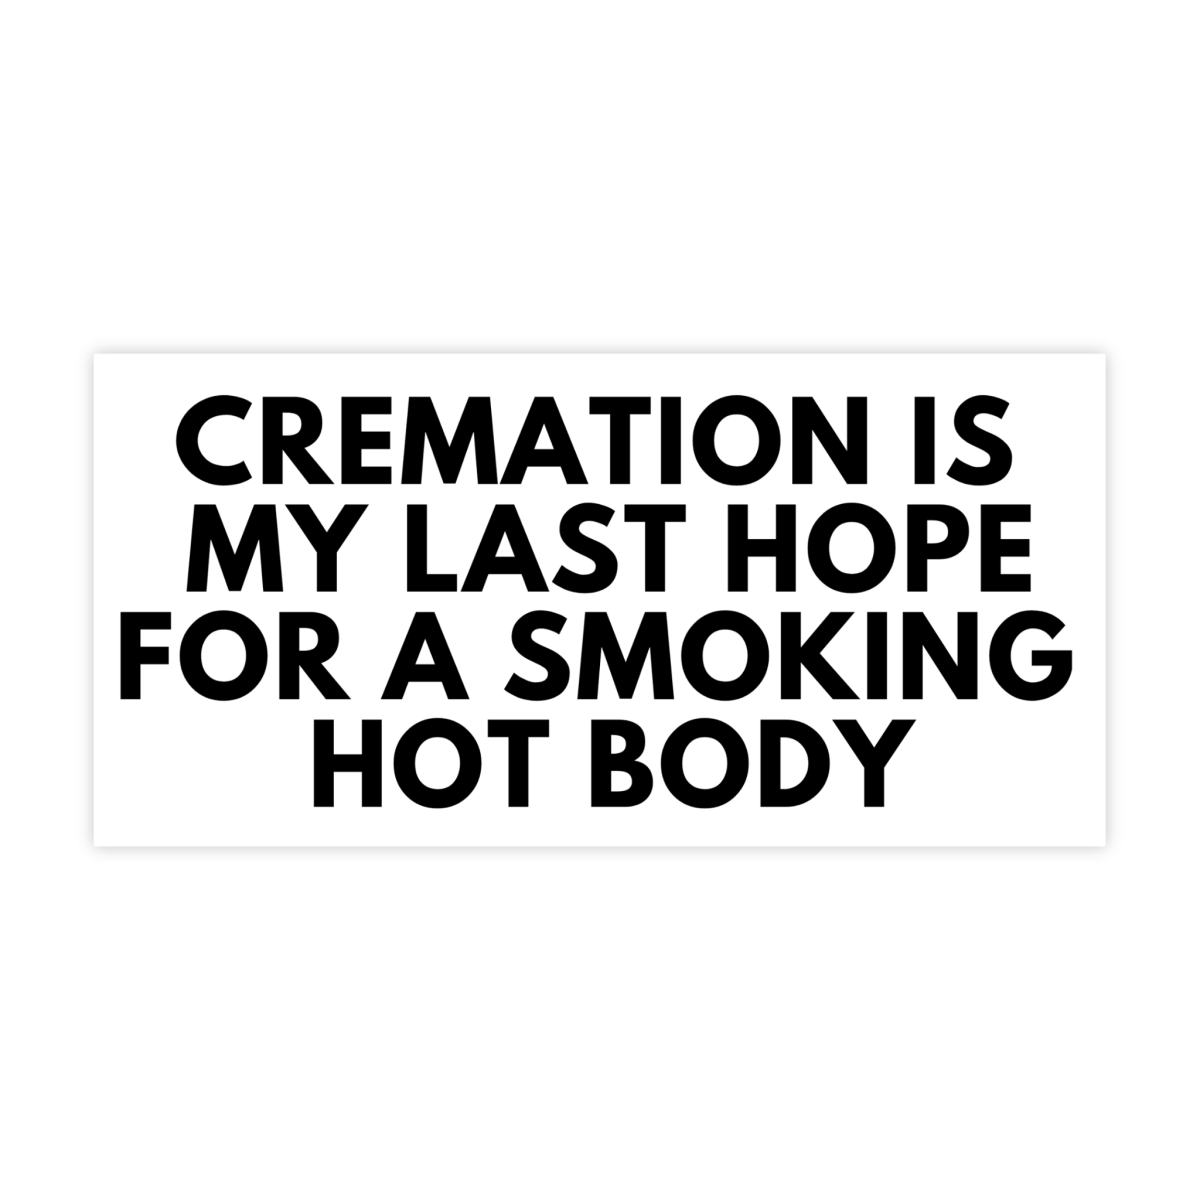 Cremation Is My Last Hope For A Smoking Hot Body Meme Bumper Sticker - stickerbullCremation Is My Last Hope For A Smoking Hot Body Meme Bumper StickerRetail StickerstickerbullstickerbullCremation_#30Cremation Is My Last Hope For A Smoking Hot Body Meme Bumper Sticker